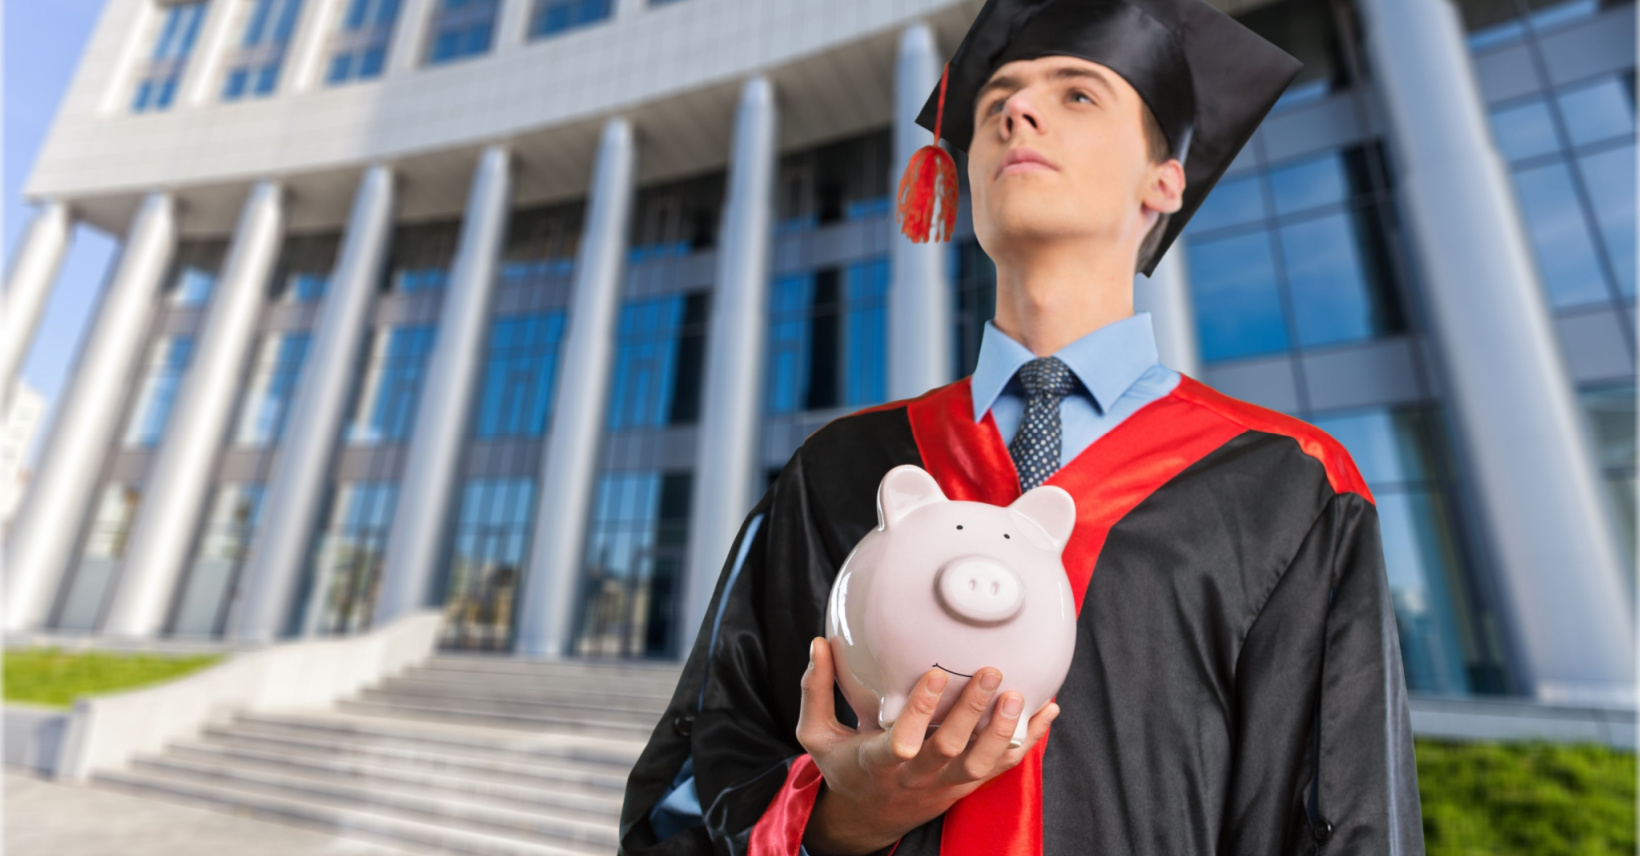 What To Do With Extra Student Loan Money